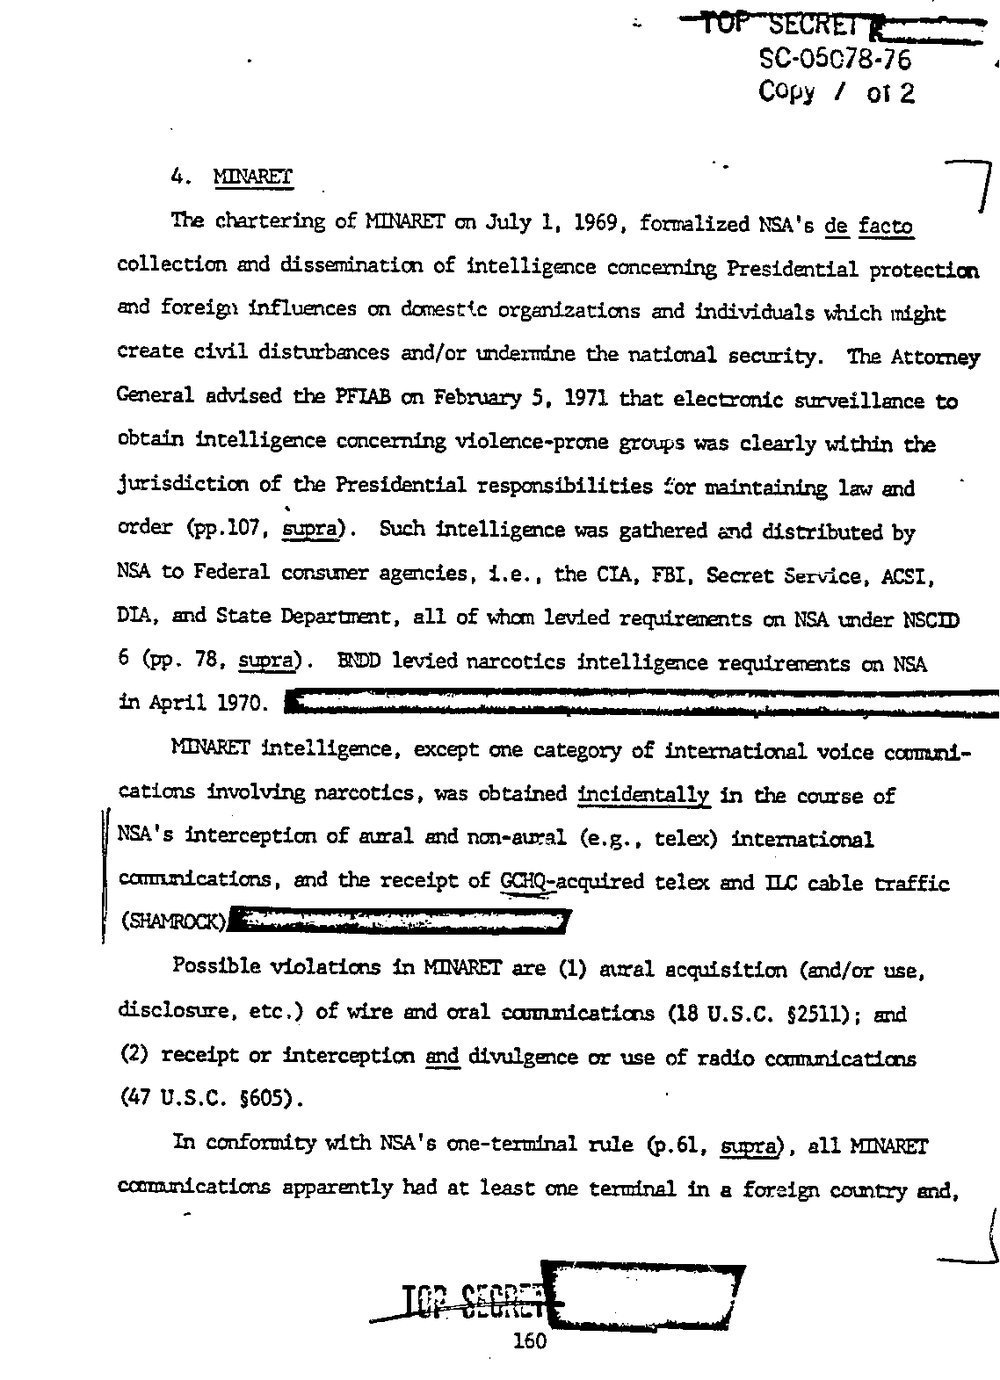 Page 168 from Report on Inquiry Into CIA Related Electronic Surveillance Activities